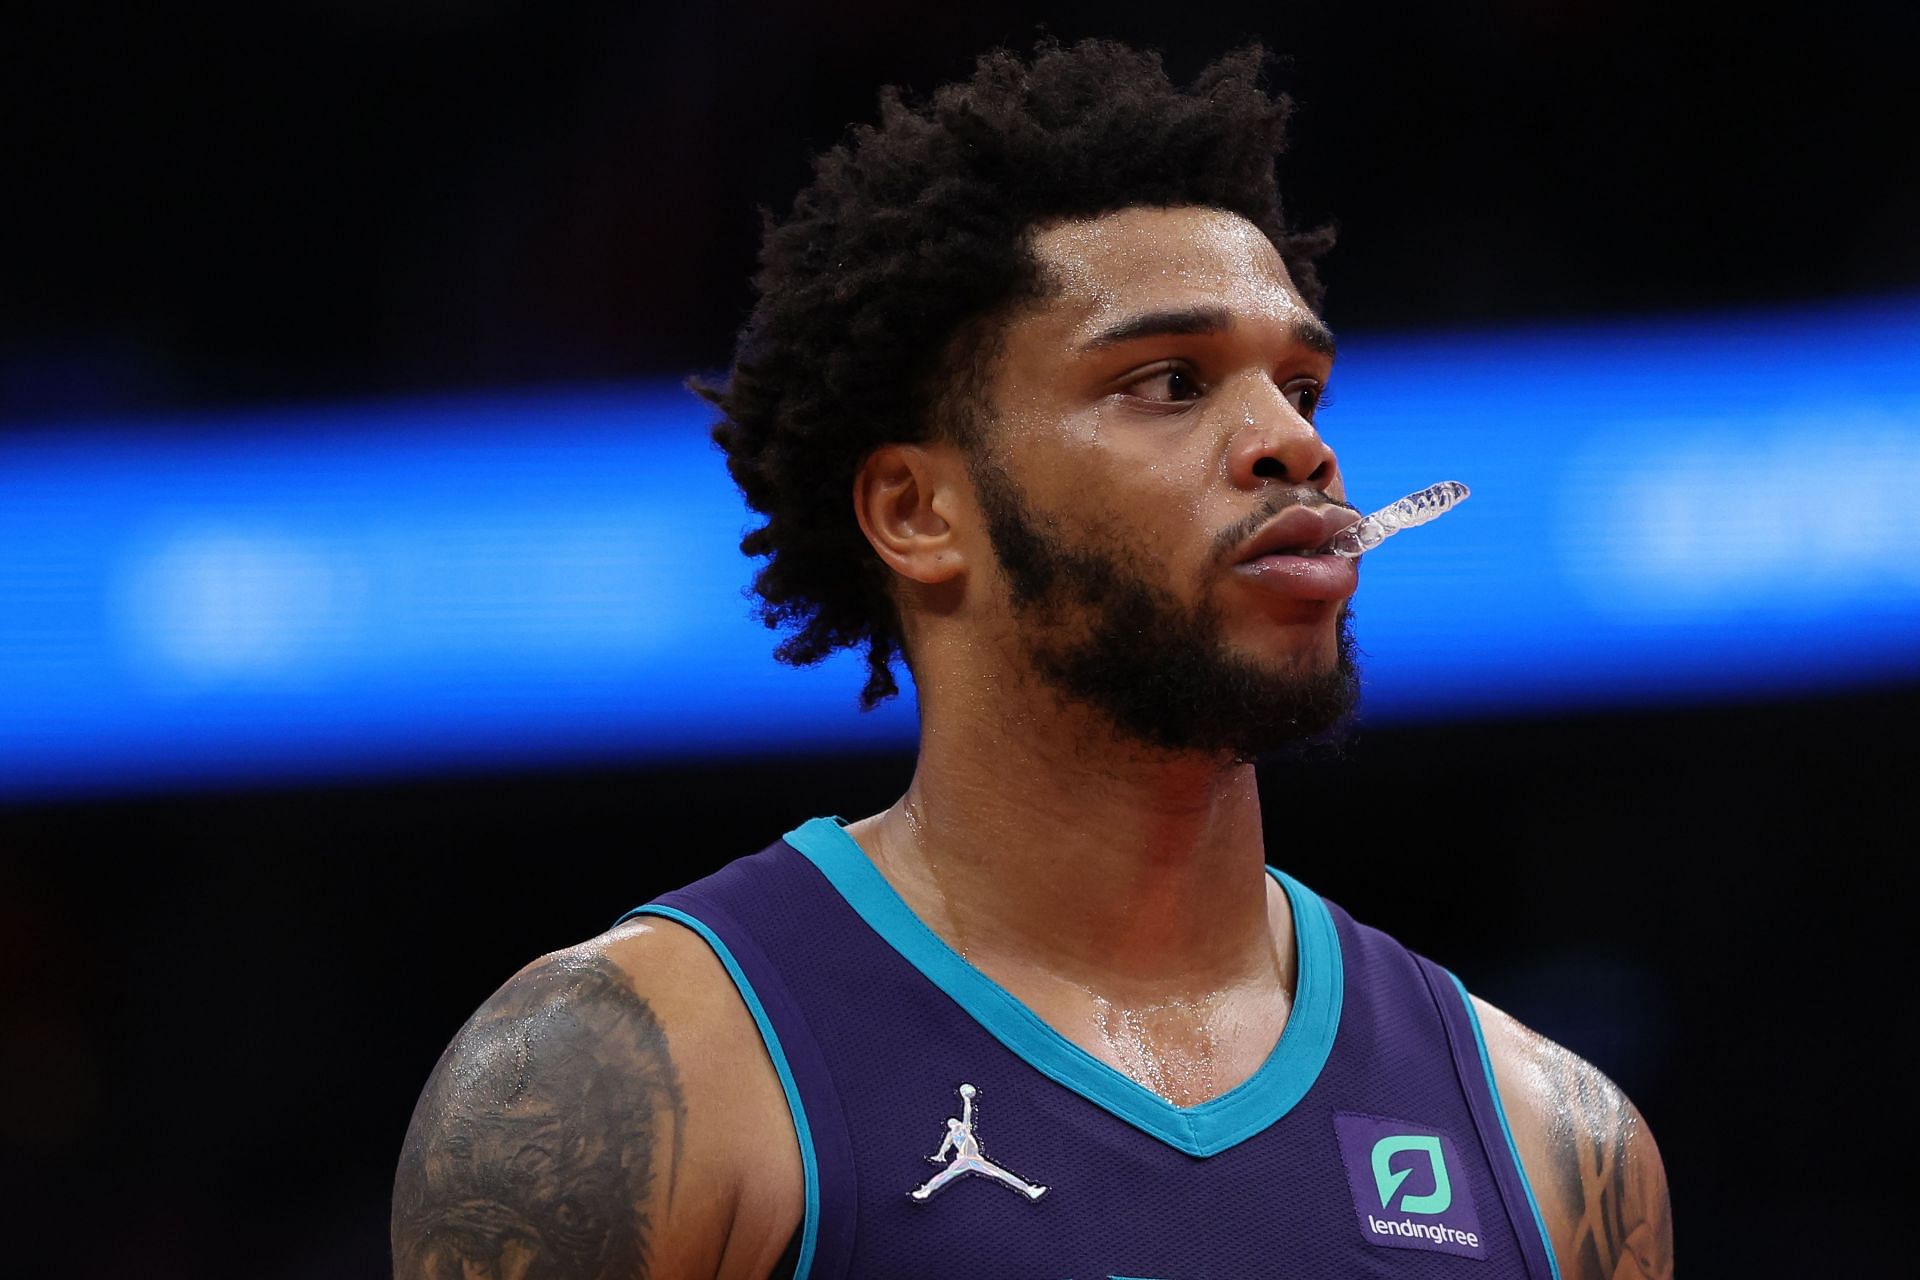 Miles Bridges looks on during a Charlotte Hornets game